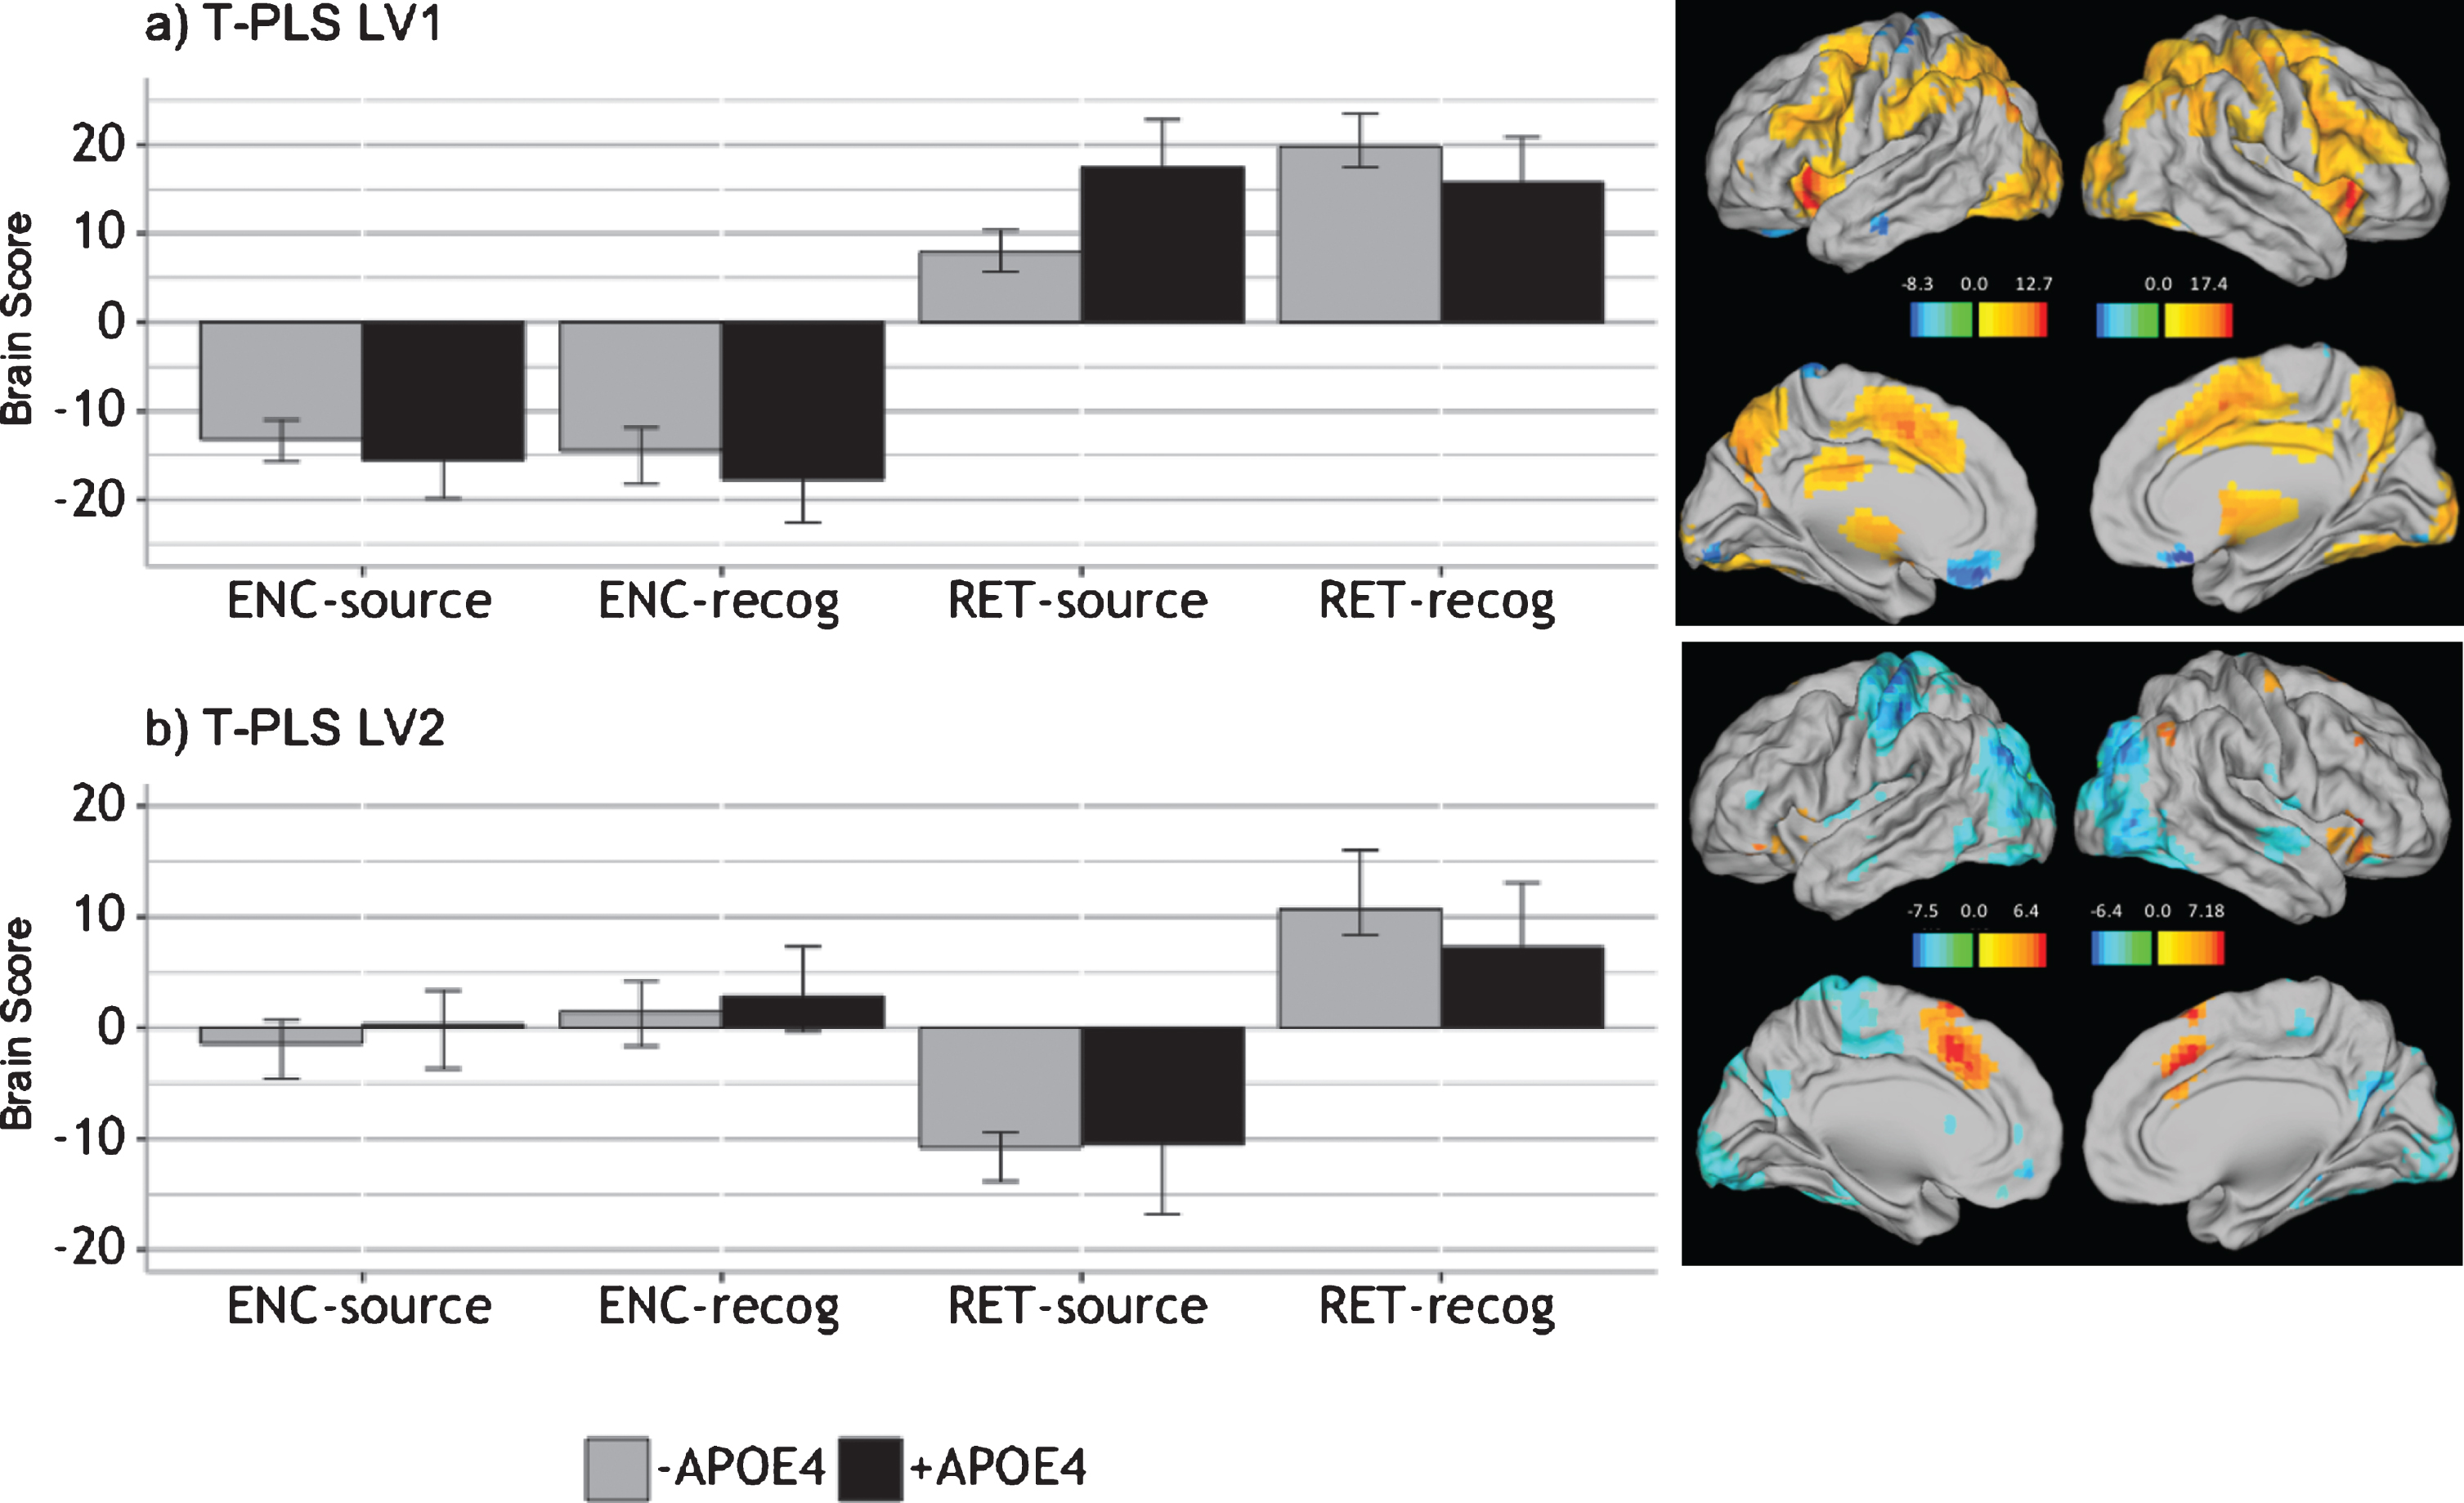 Design salience plot and singular image representing brain activity patterns by condition for (a) LV1 and (b) LV2, revealed by the T-PLS analysis. LEFT: Error bars on design salience plots represent 95% confidence intervals. Positive brain scores indicate conditions in which activity was greater in positive brain salience regions (shown in red in the singular images) and vice versa. Negative brain scores indicate conditions in which activity was greater in negative brain salience regions (shown in red in the singular images) and vice versa. RIGHT: Singular images were thresholded at a bootrstrap ratio of±3.5, p < 0.001. Red brain regions represent positive brain saliences; blue regions represent negative brain saliences. Activations are presented on template images of the lateral and medial surfaces of the left and right hemispheres of the brain using Caret software (http://brainvis.wustl.edu/wiki/index.php/Caret:Download).